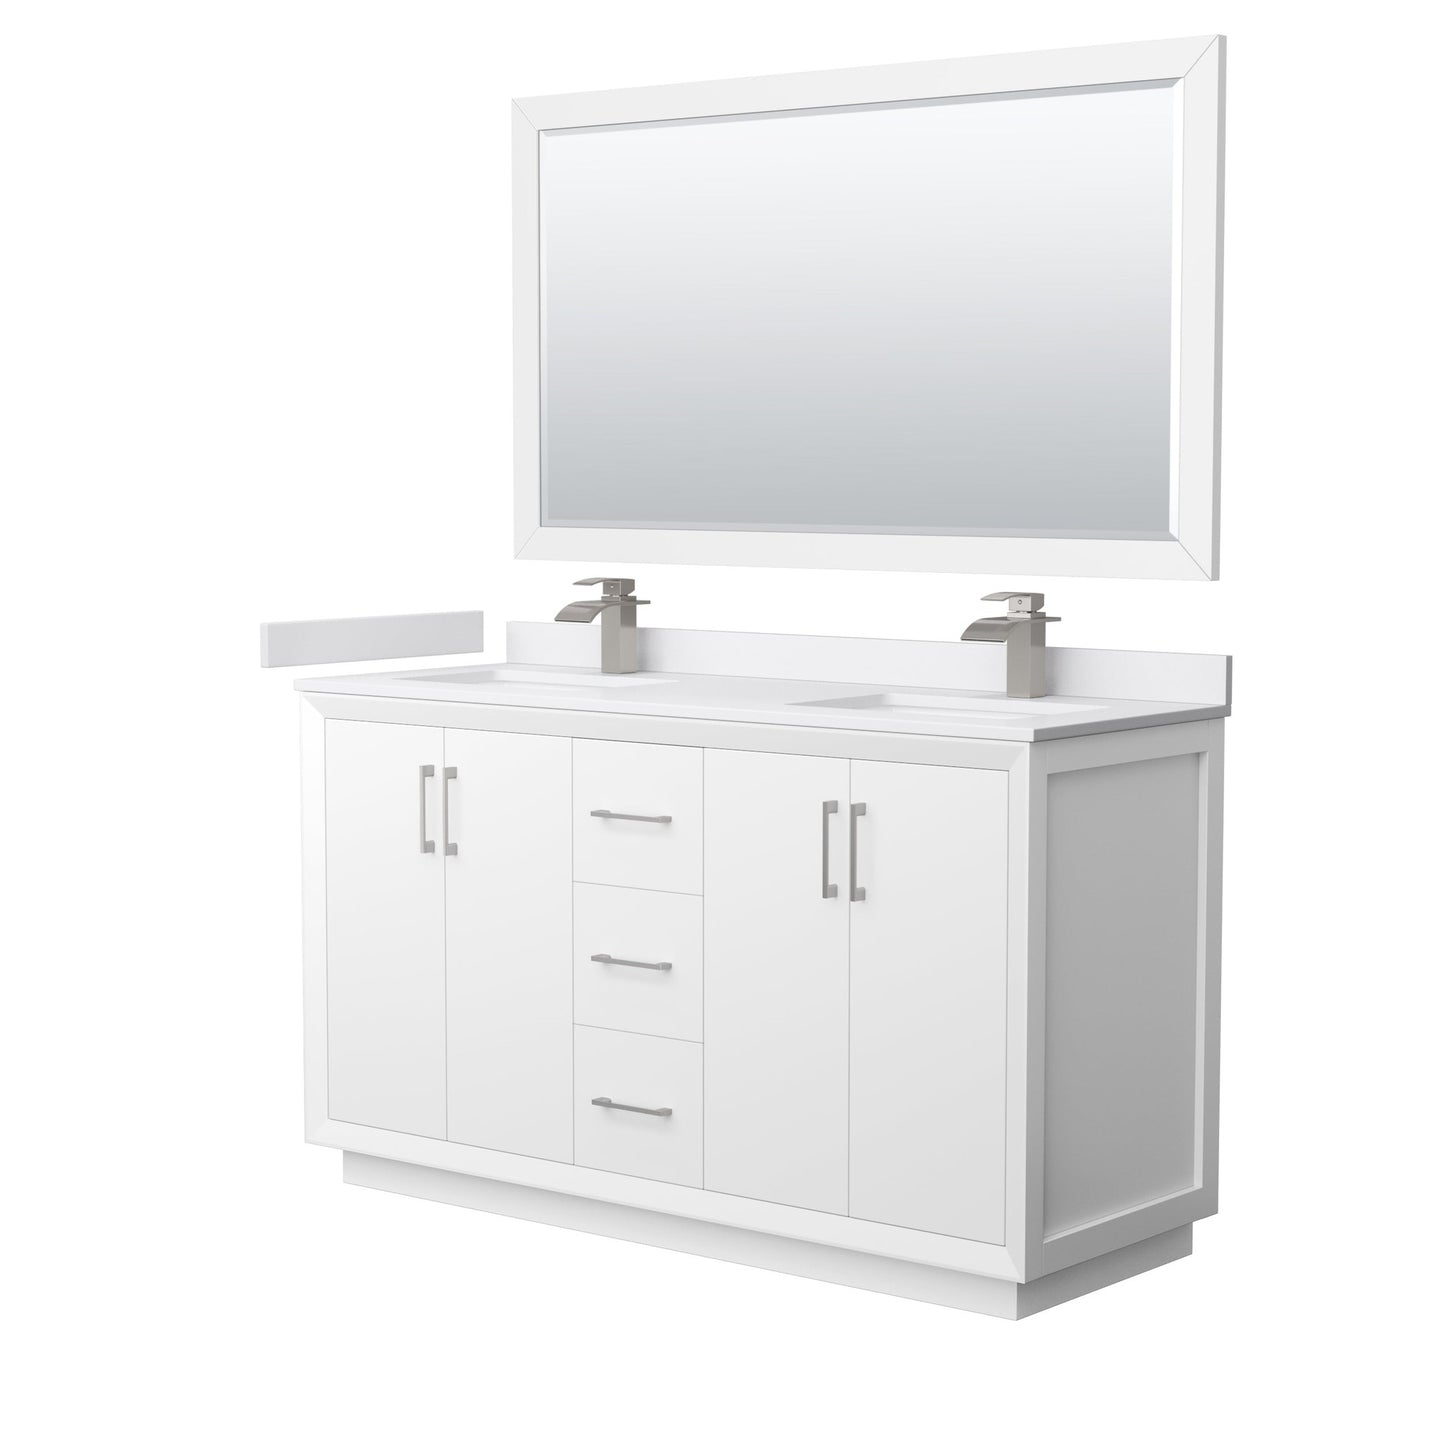 Wyndham Collection Strada 60" Double Bathroom Vanity in White, White Cultured Marble Countertop, Undermount Square Sink, Brushed Nickel Trim, 58" Mirror